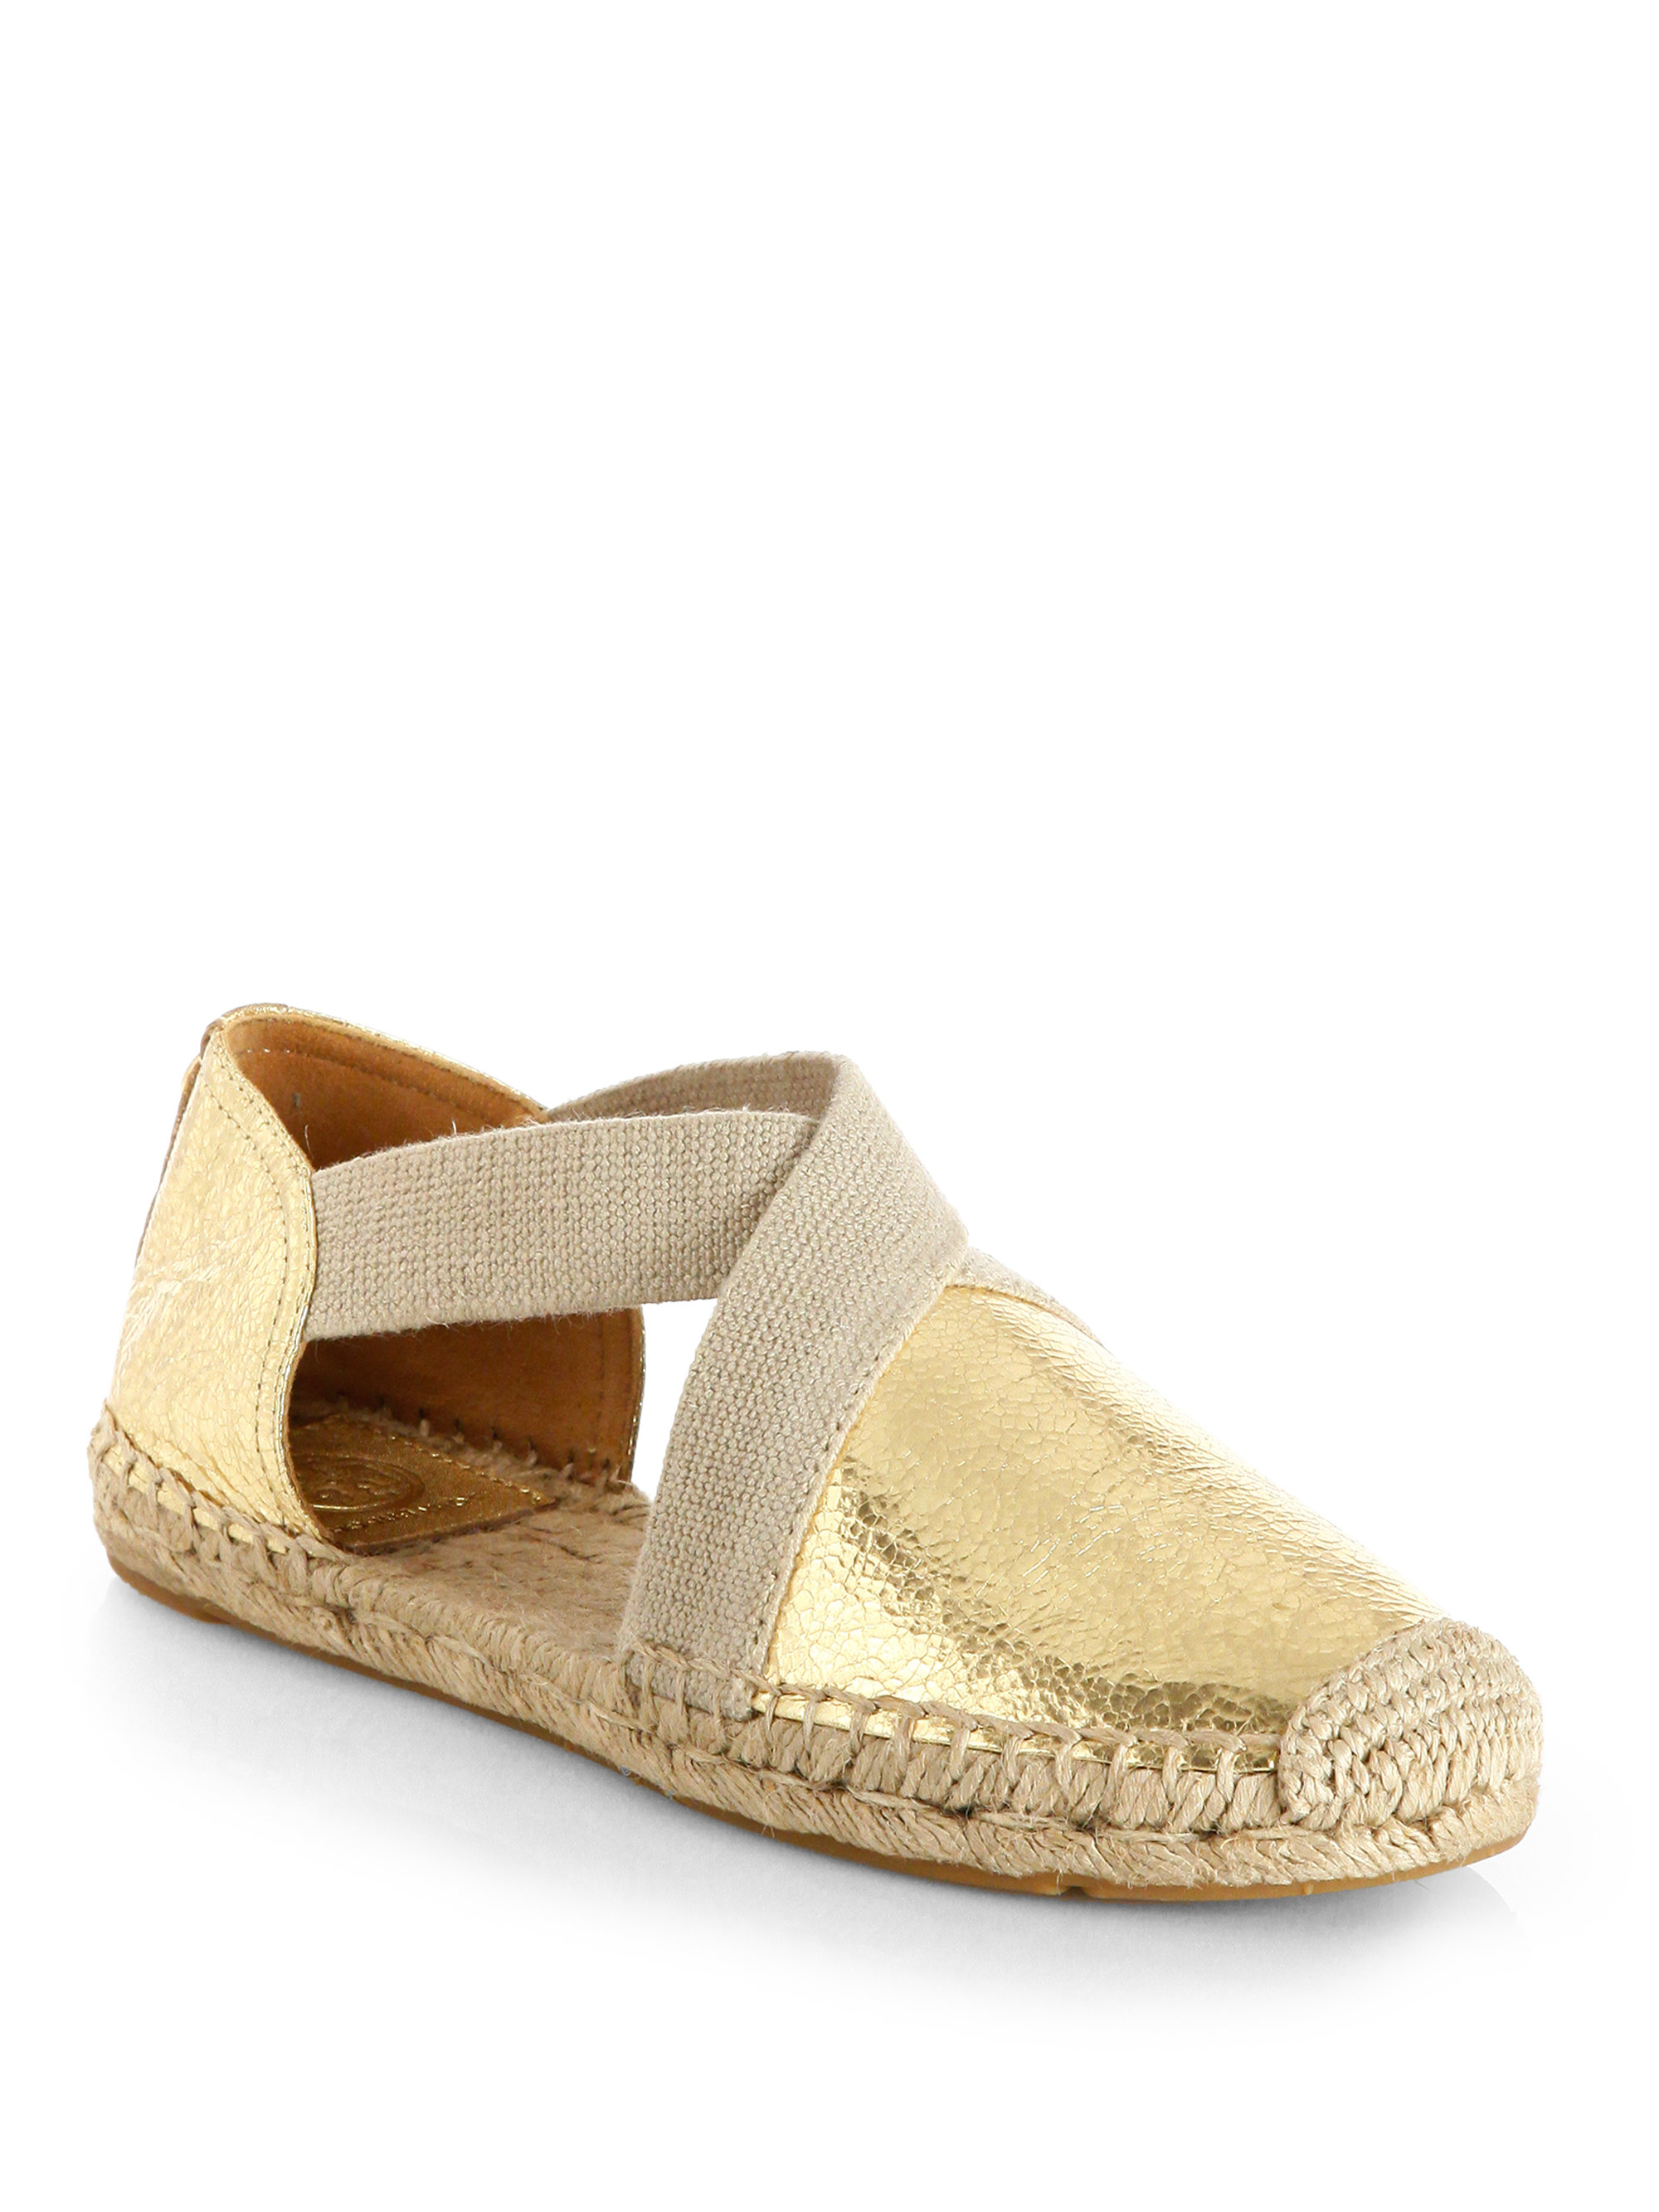 Tory Burch Catalina Metallic Leather Espadrille Flats in Gold (GOLD